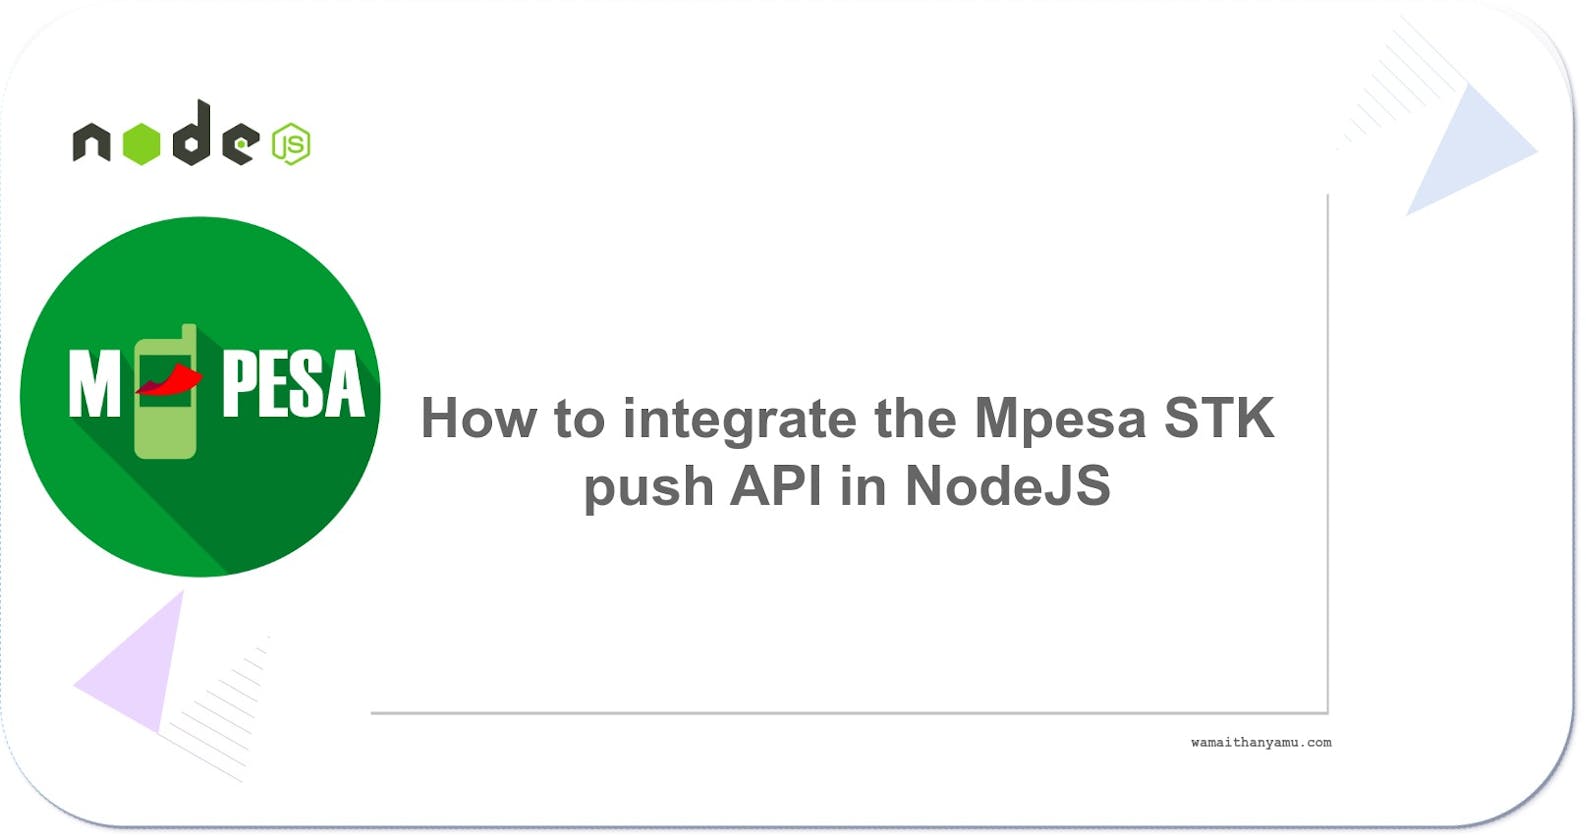 How to integrate the Mpesa STK push API in Nodejs.